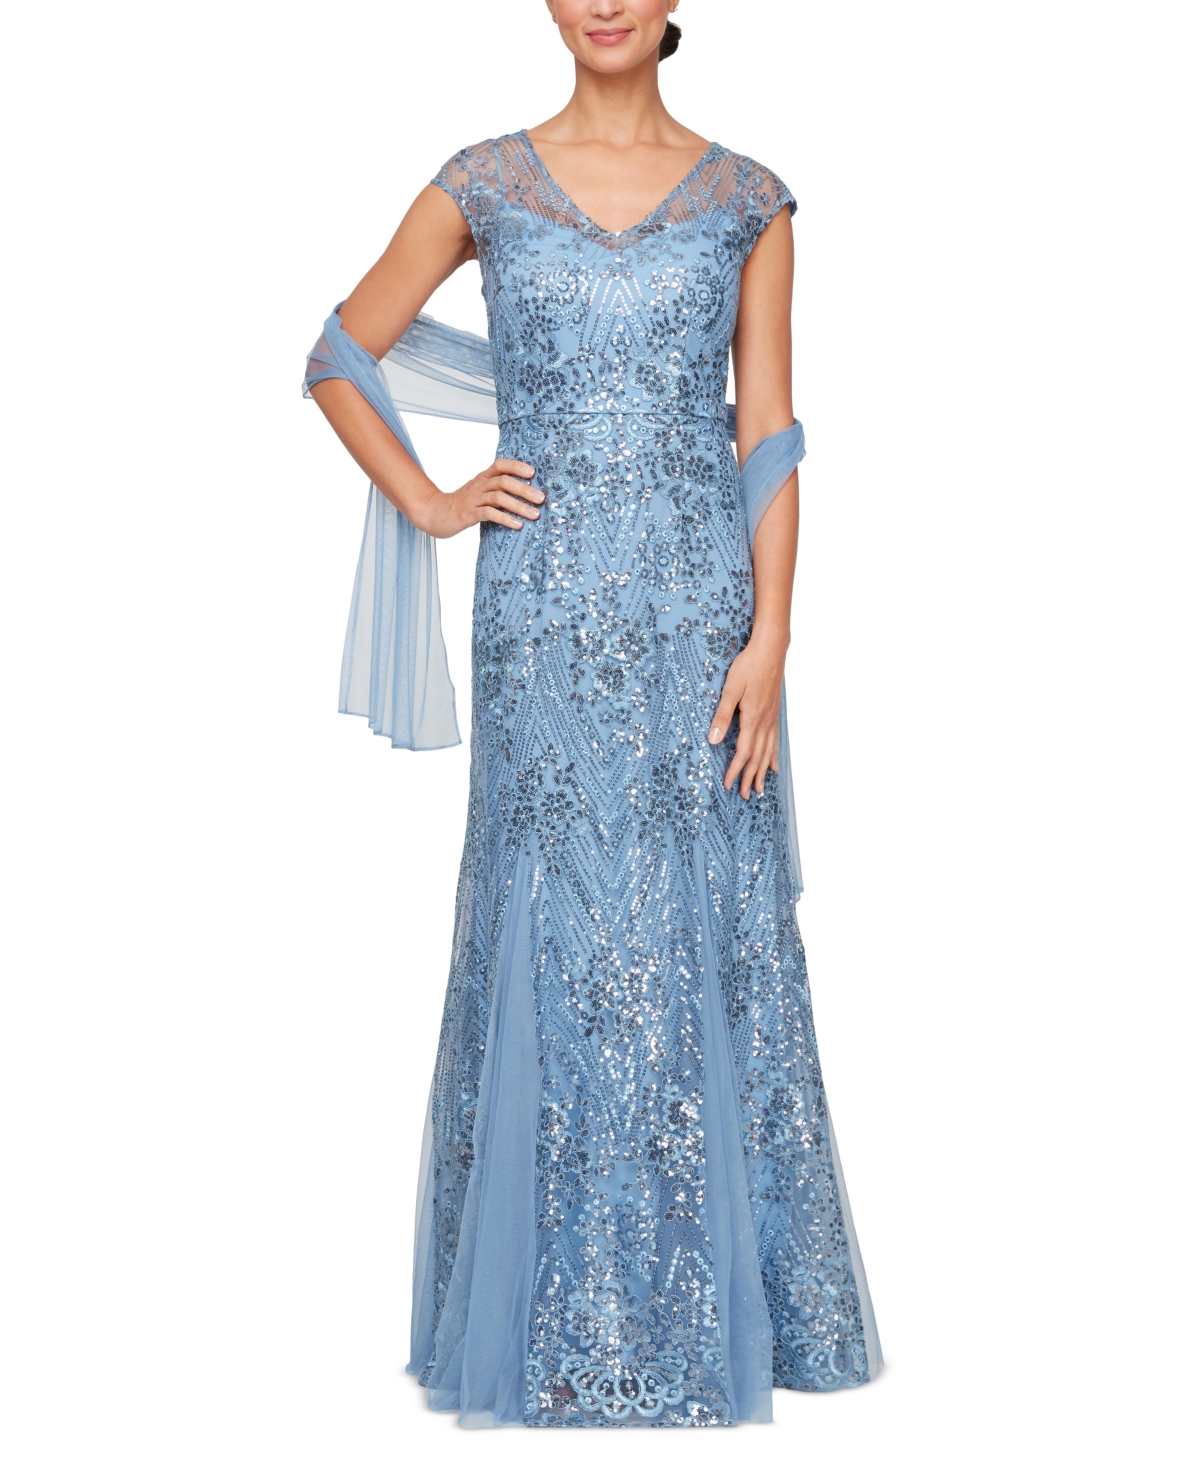 ALEX EVENINGS WOMEN'S EMBELLISHED CAP-SLEEVE GOWN & SHAWL